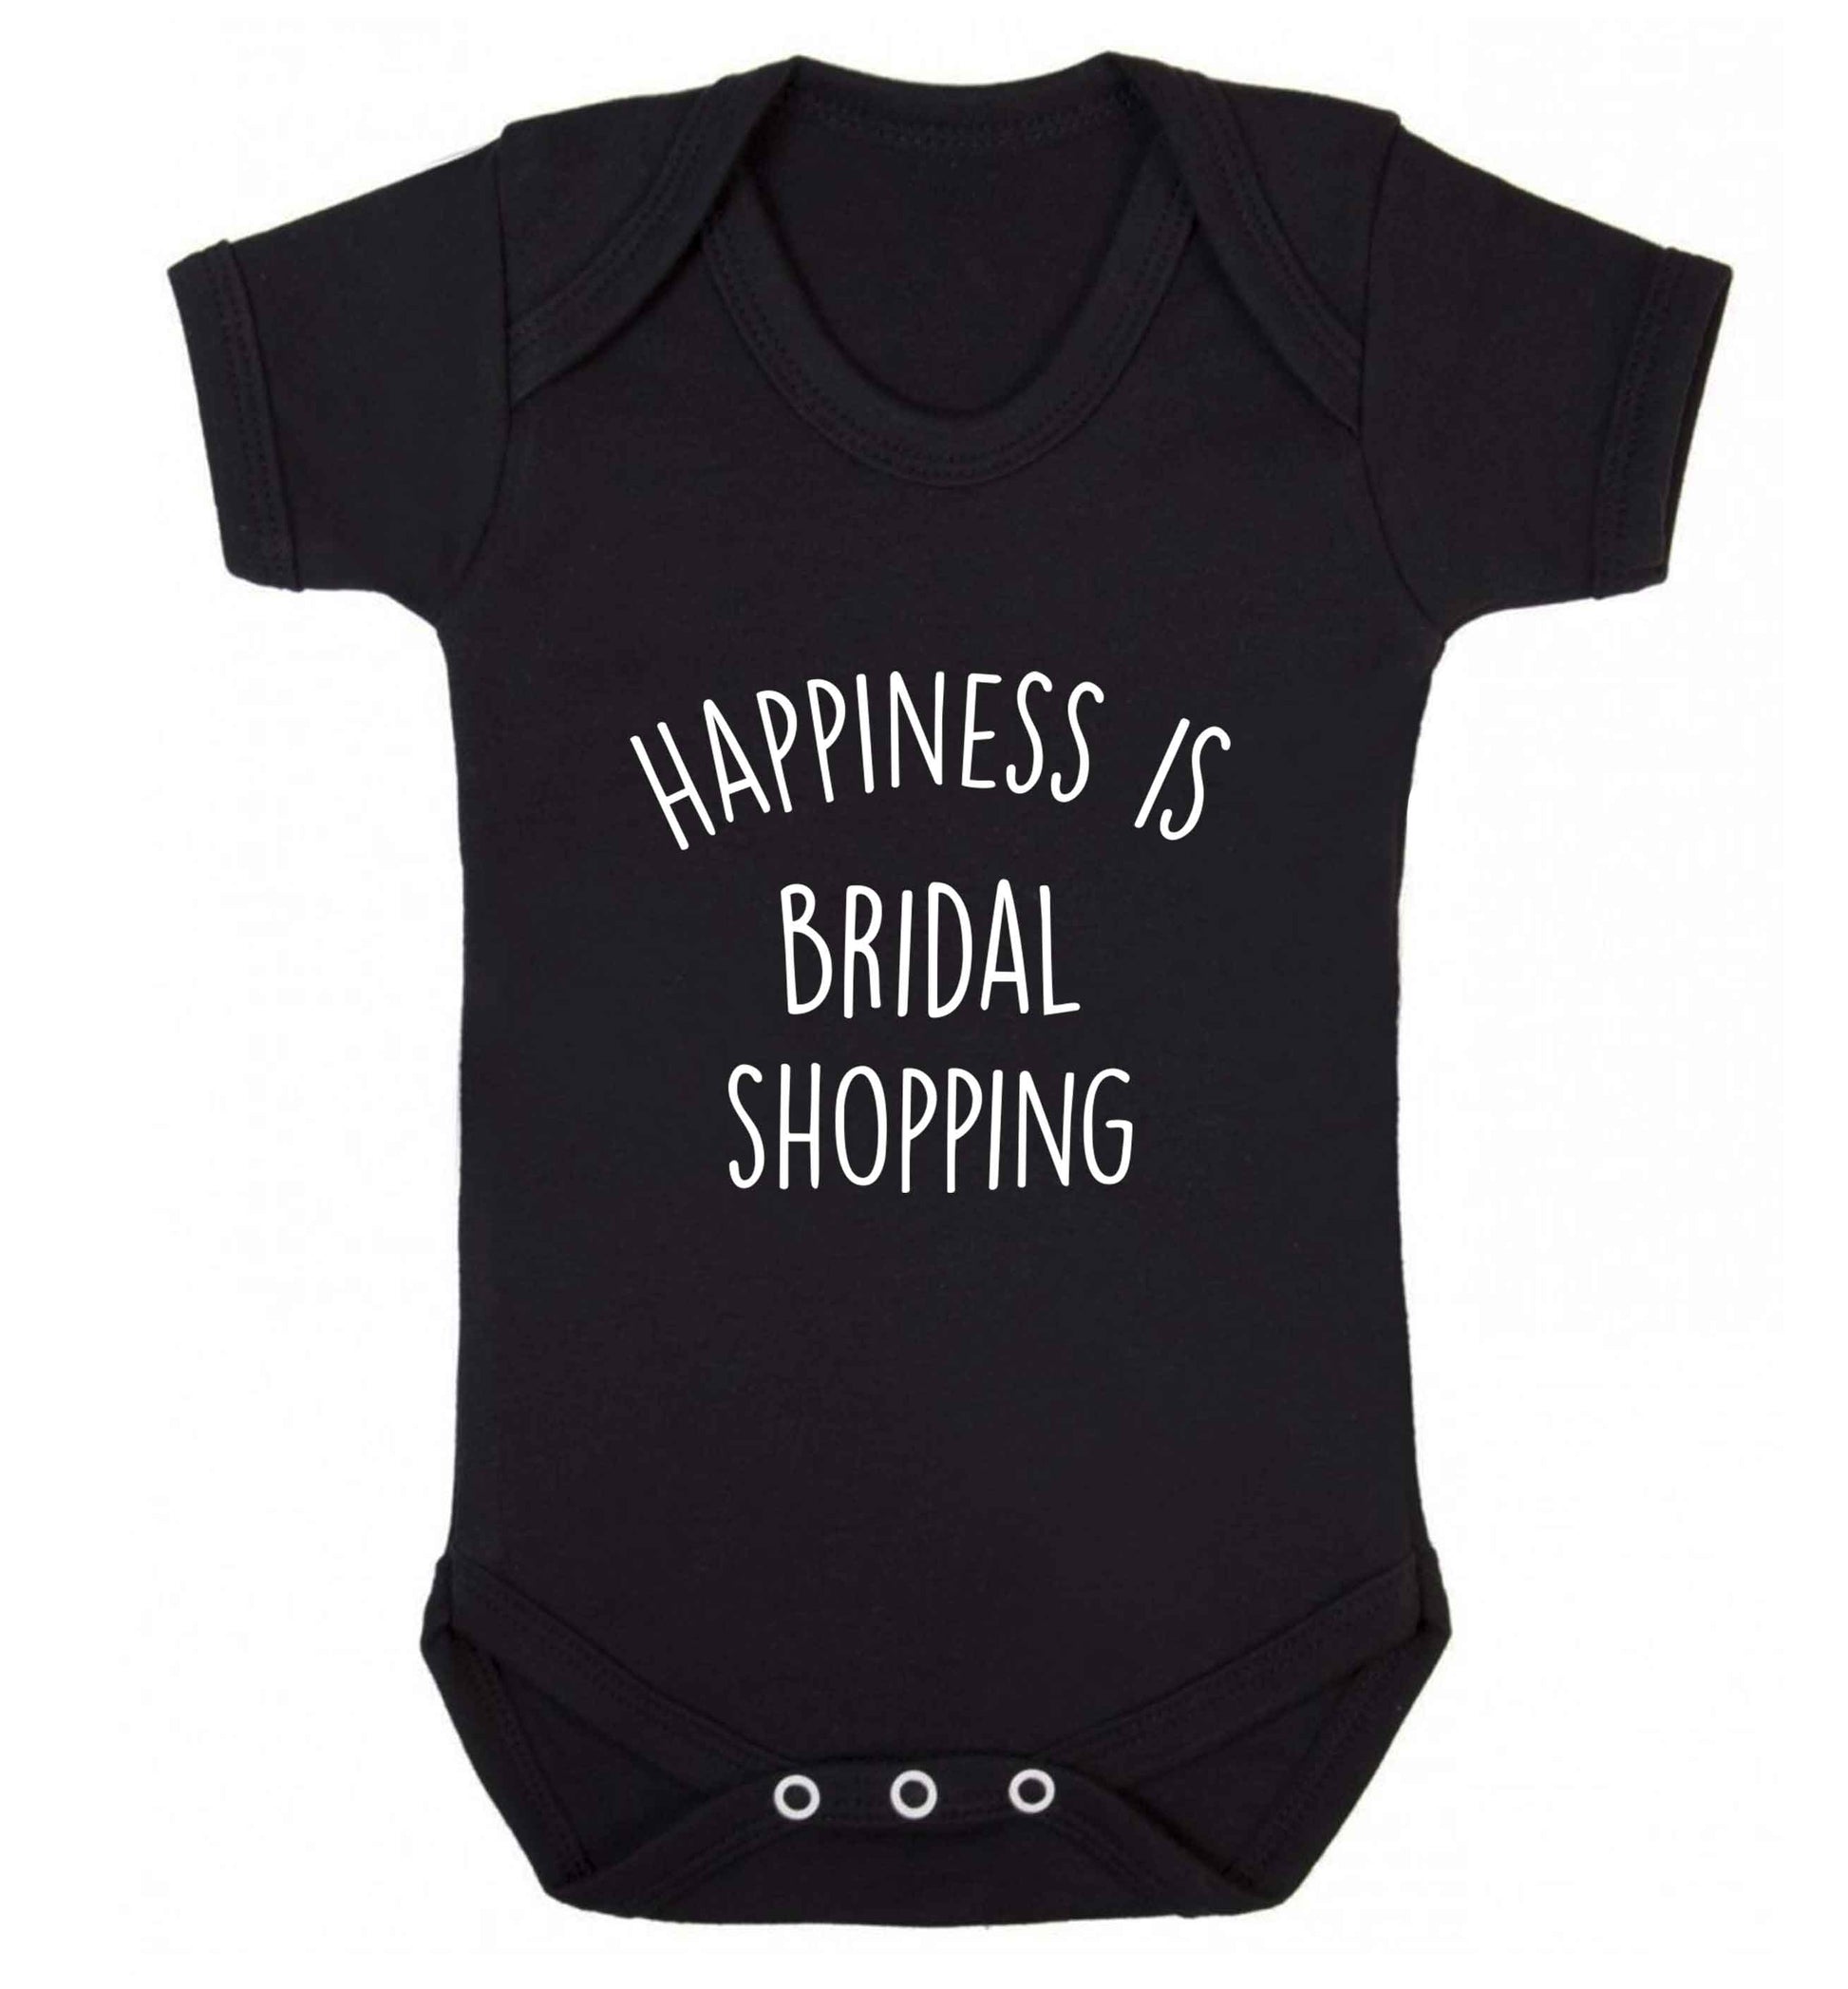 Happiness is bridal shopping baby vest black 18-24 months